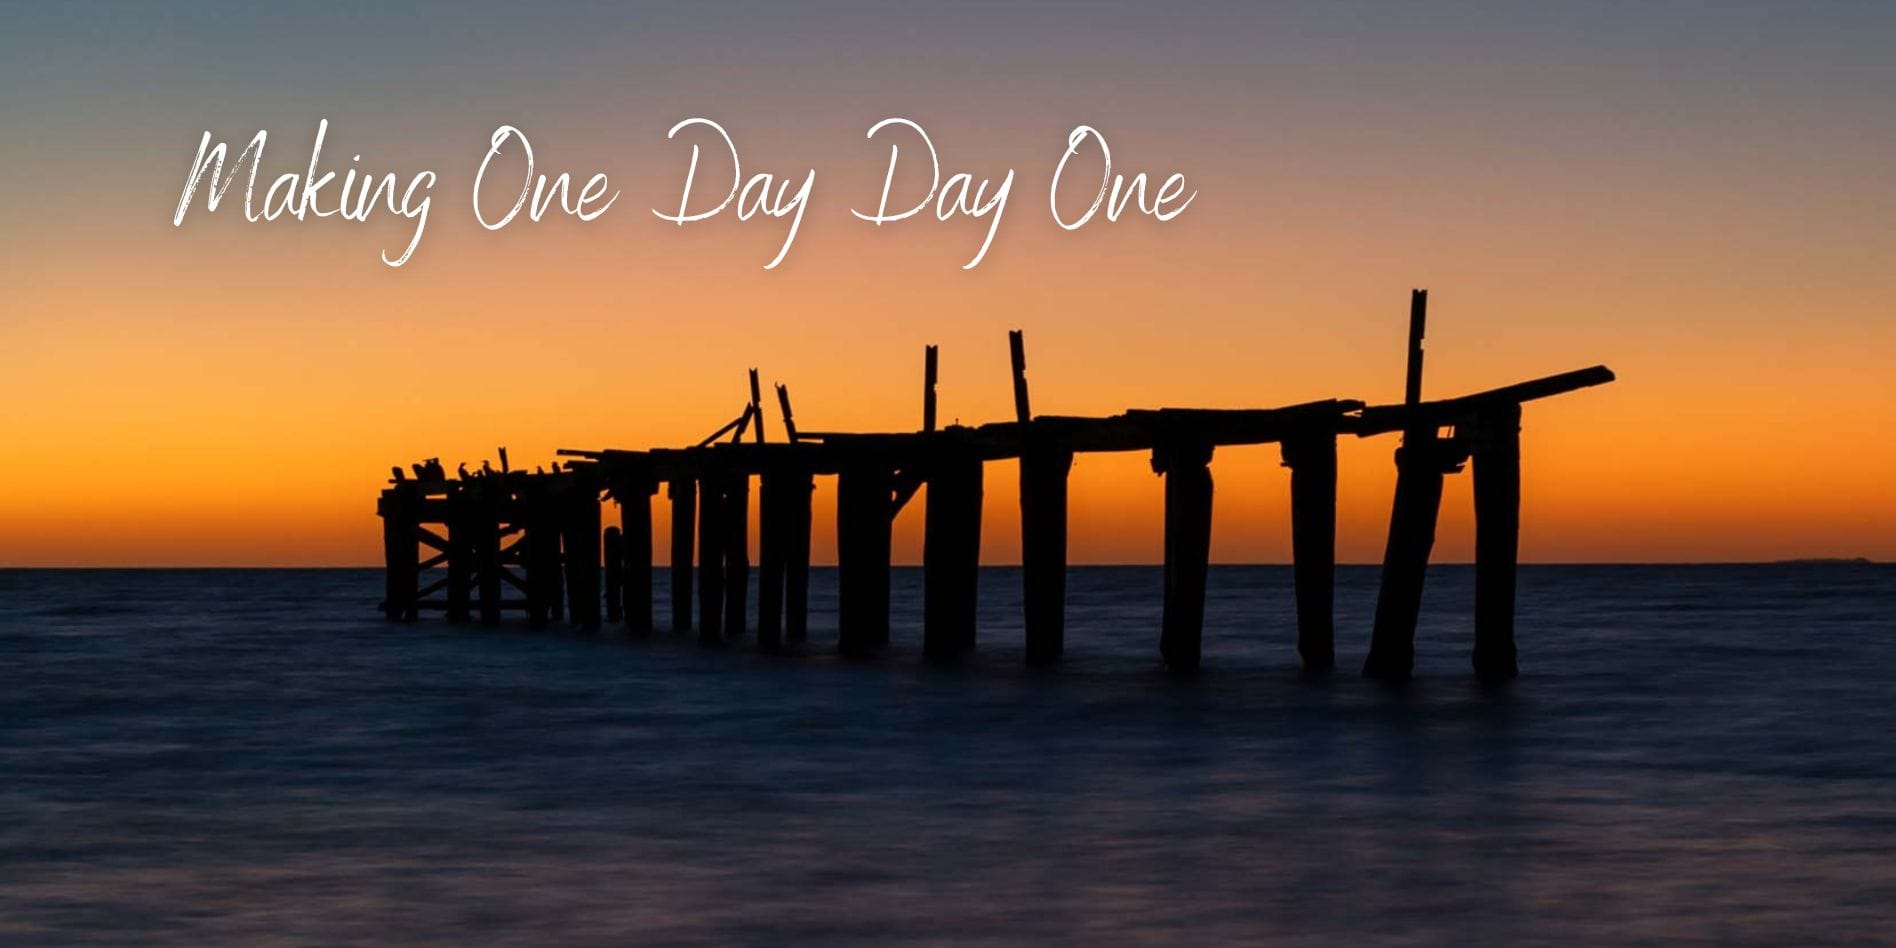 Making one day day one header